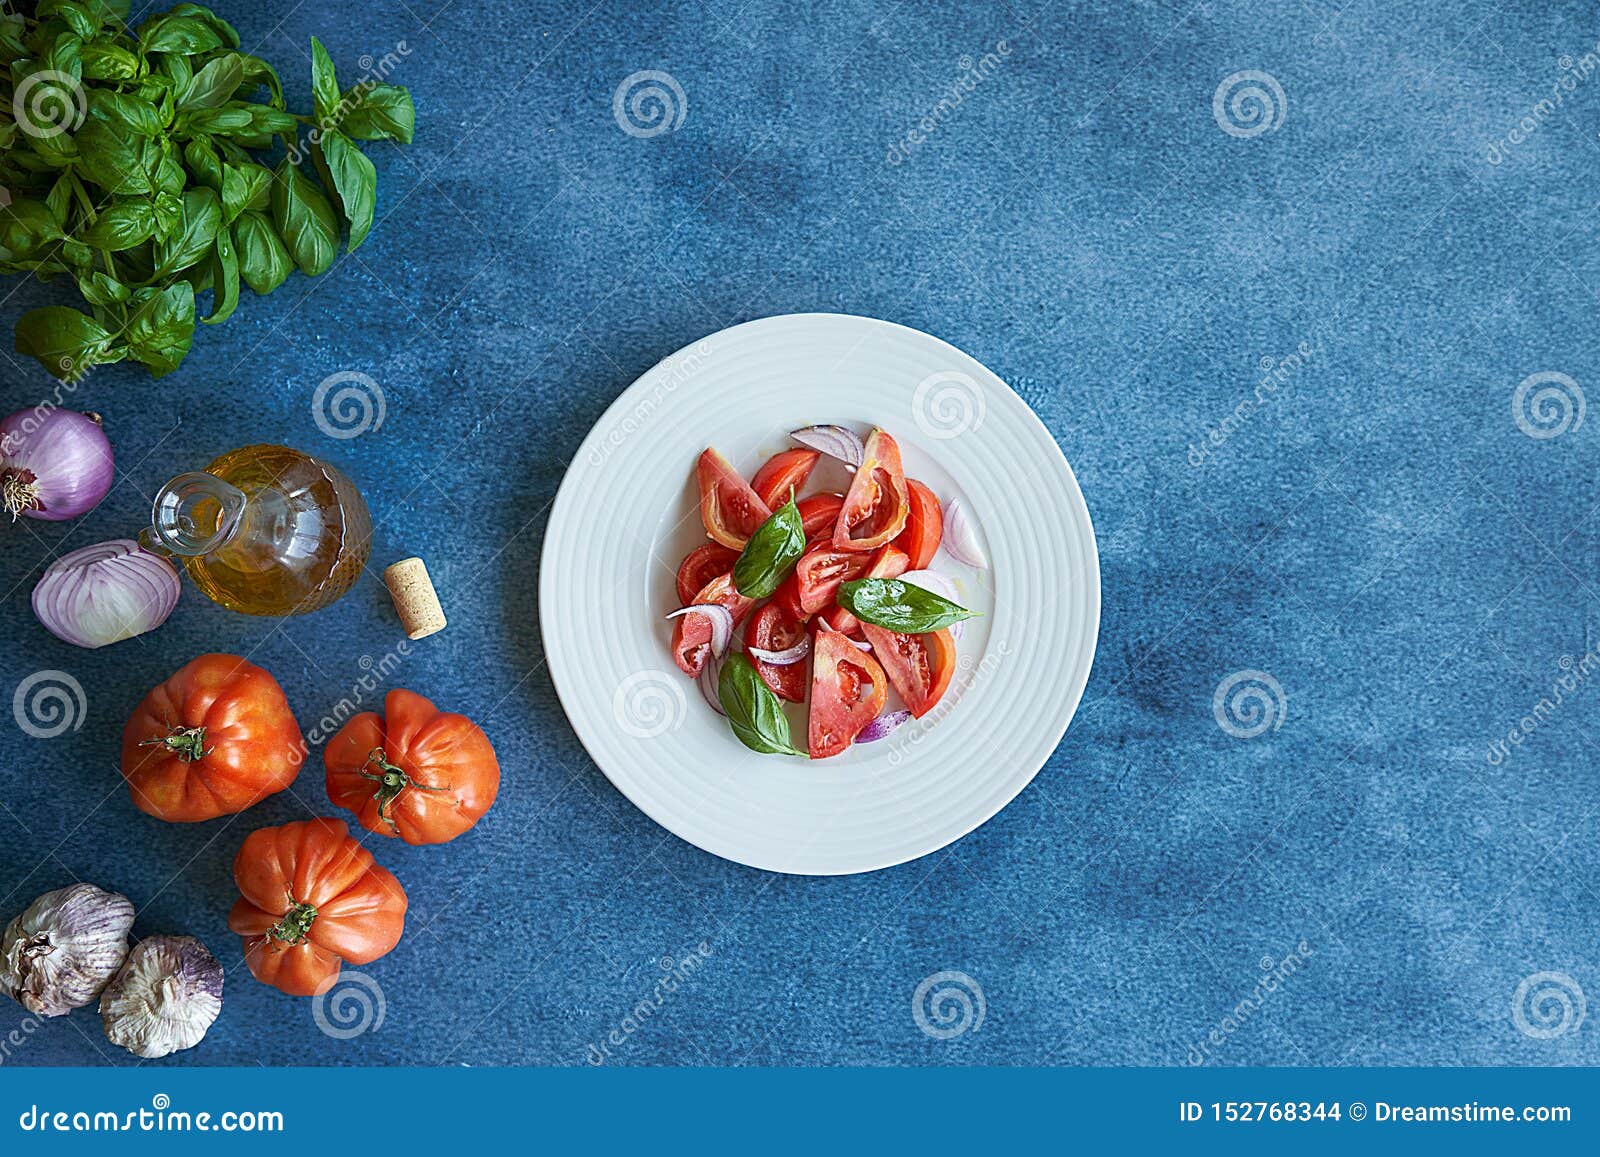 vegetable tomato salad with extra virgin olive oil, purple onion, purple garlic and basil. accompanied by a bottle of extra virgin